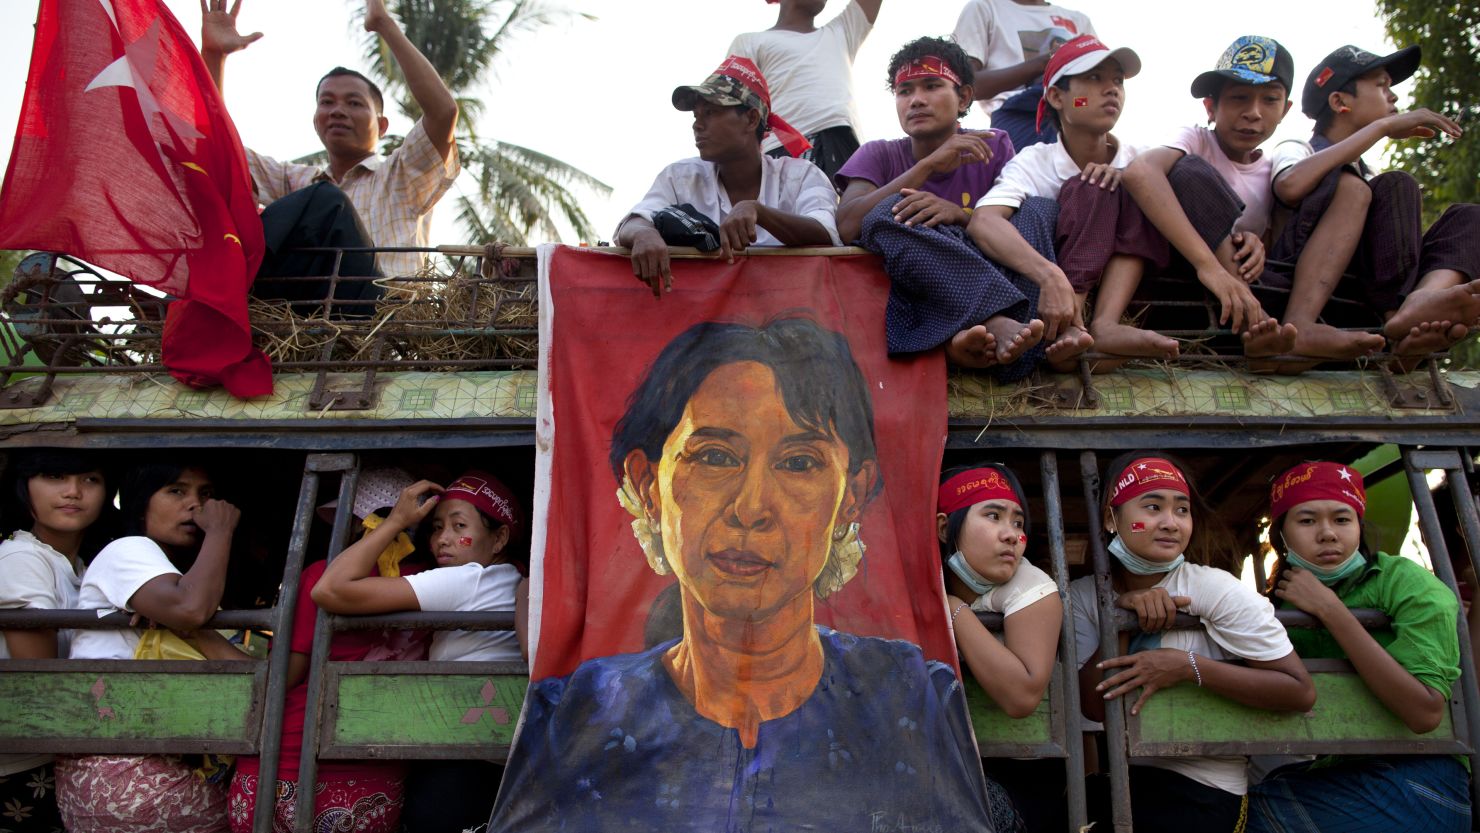 Supporters pack a truck with the hope of seeing democracy leader Aung San Suu Kyi on her visit to her constituency for the parliamentary elections April 1, 2012 in Myanmar.